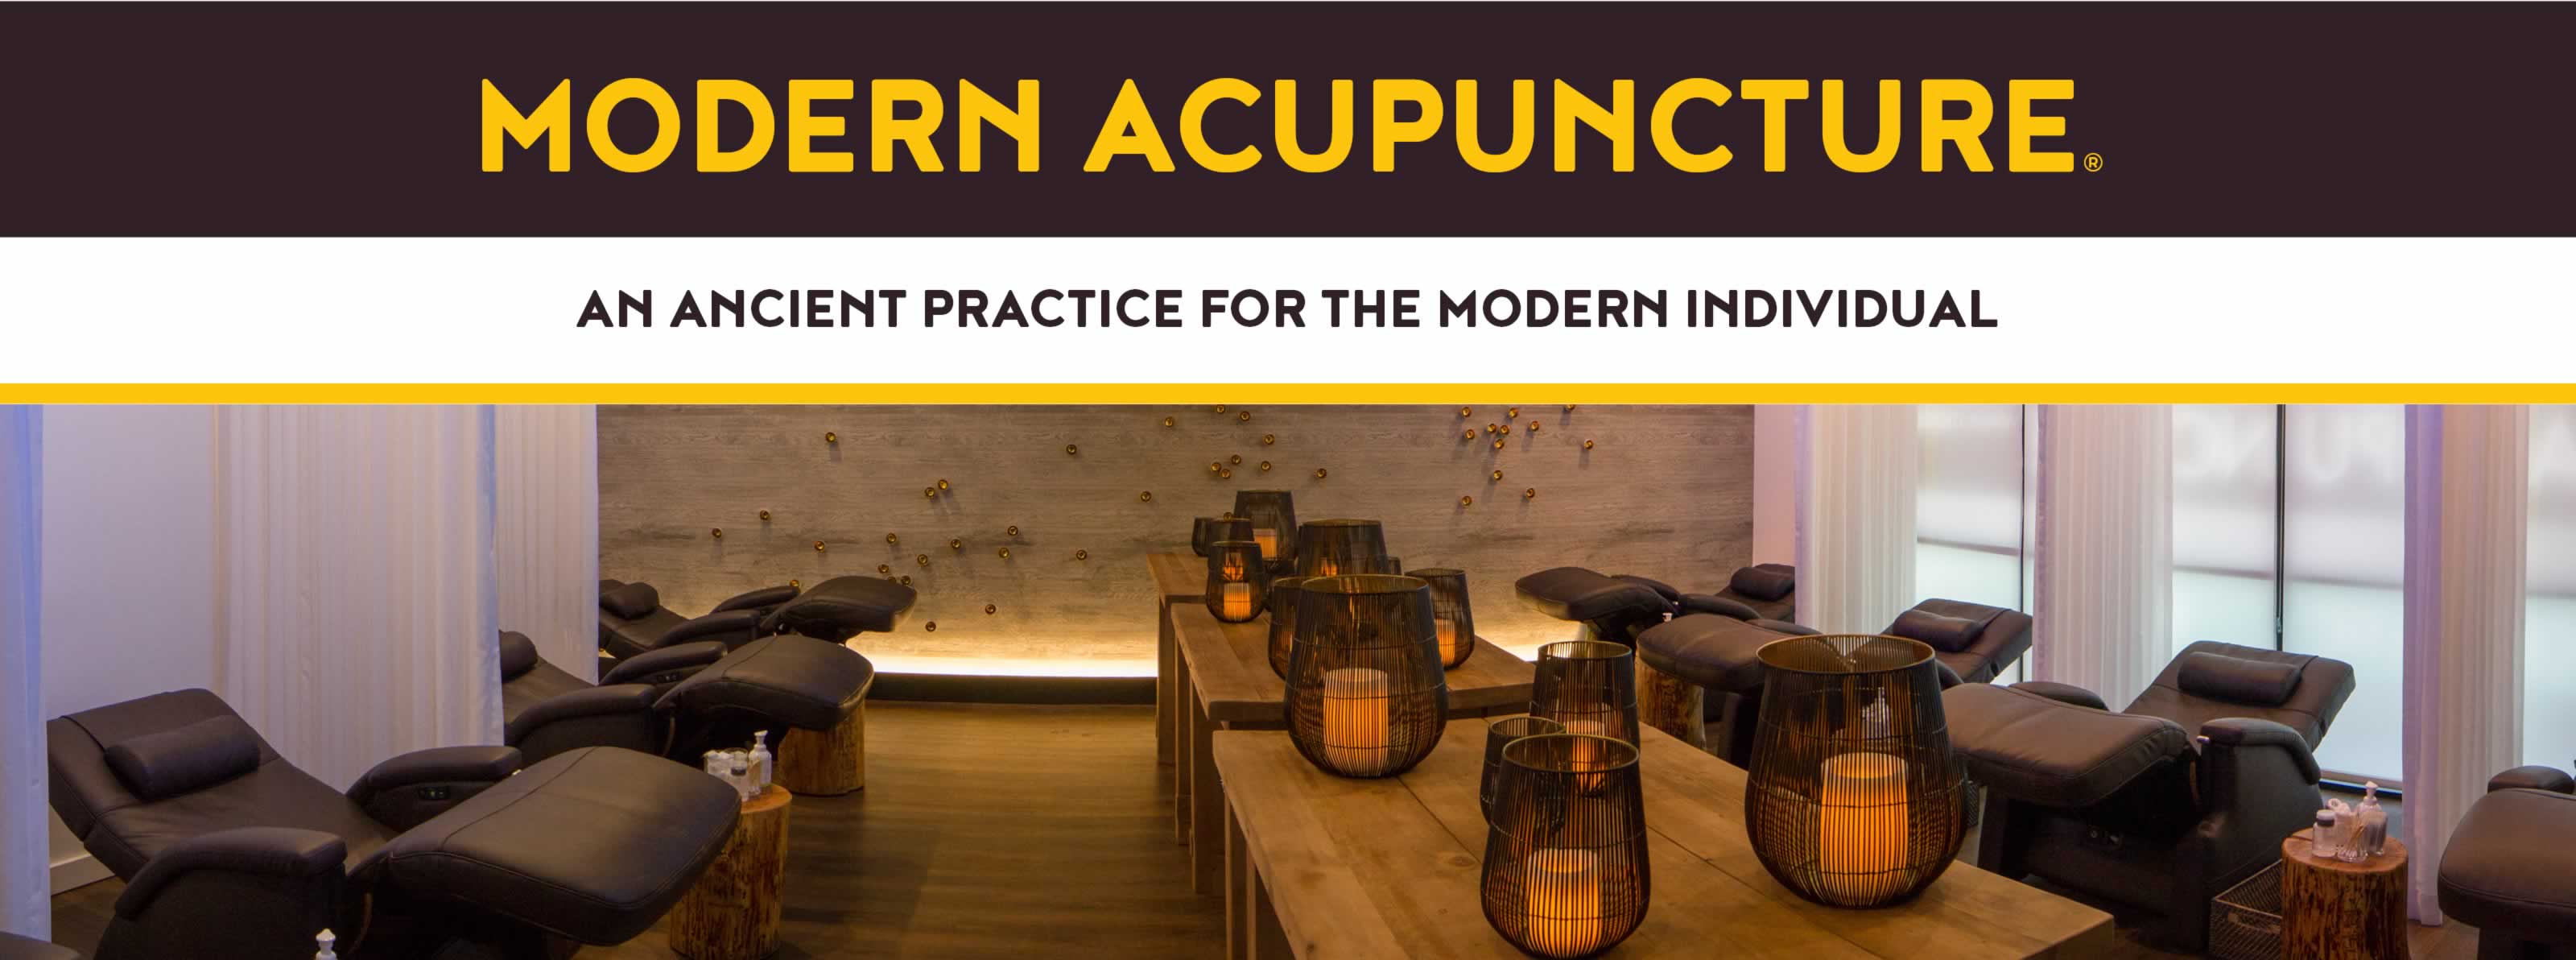 MODERN ACUPUNCTURE. AN ANCIENT PRACTICE FOR THE MODERN INDIVIDUAL